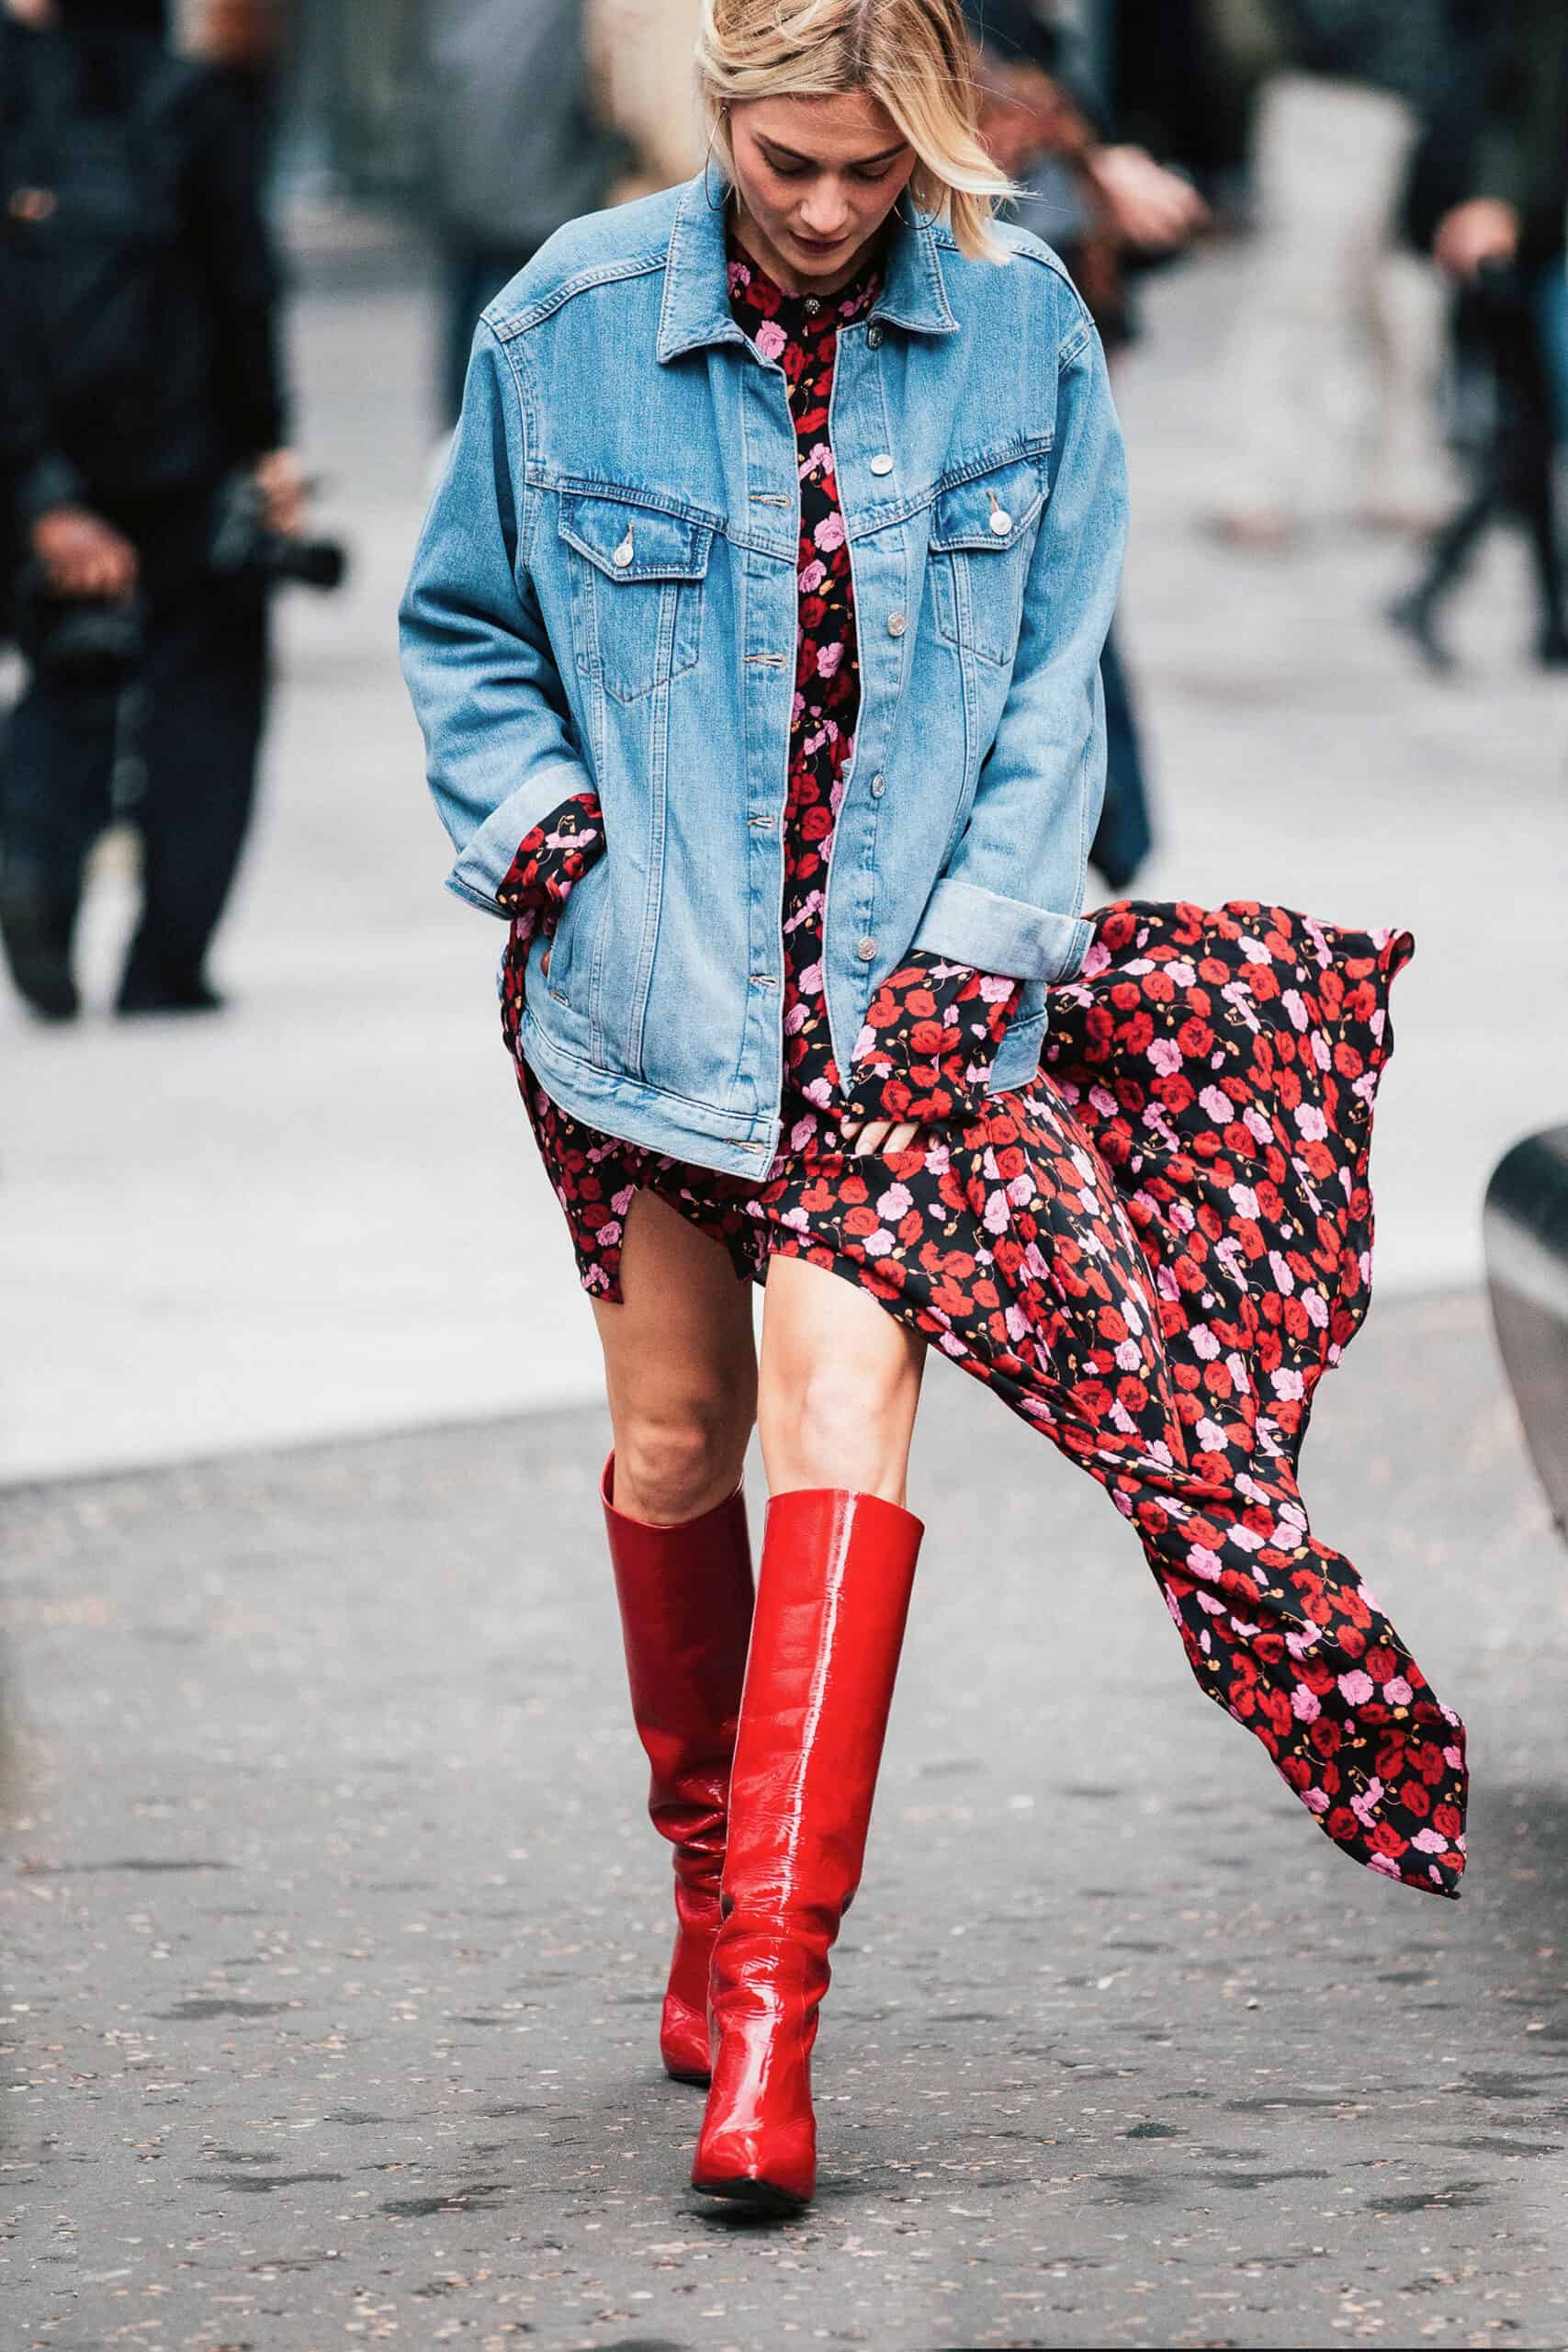 woman wearing an oversized denim jacket over a floral black and red dress with leather knee-high red boots